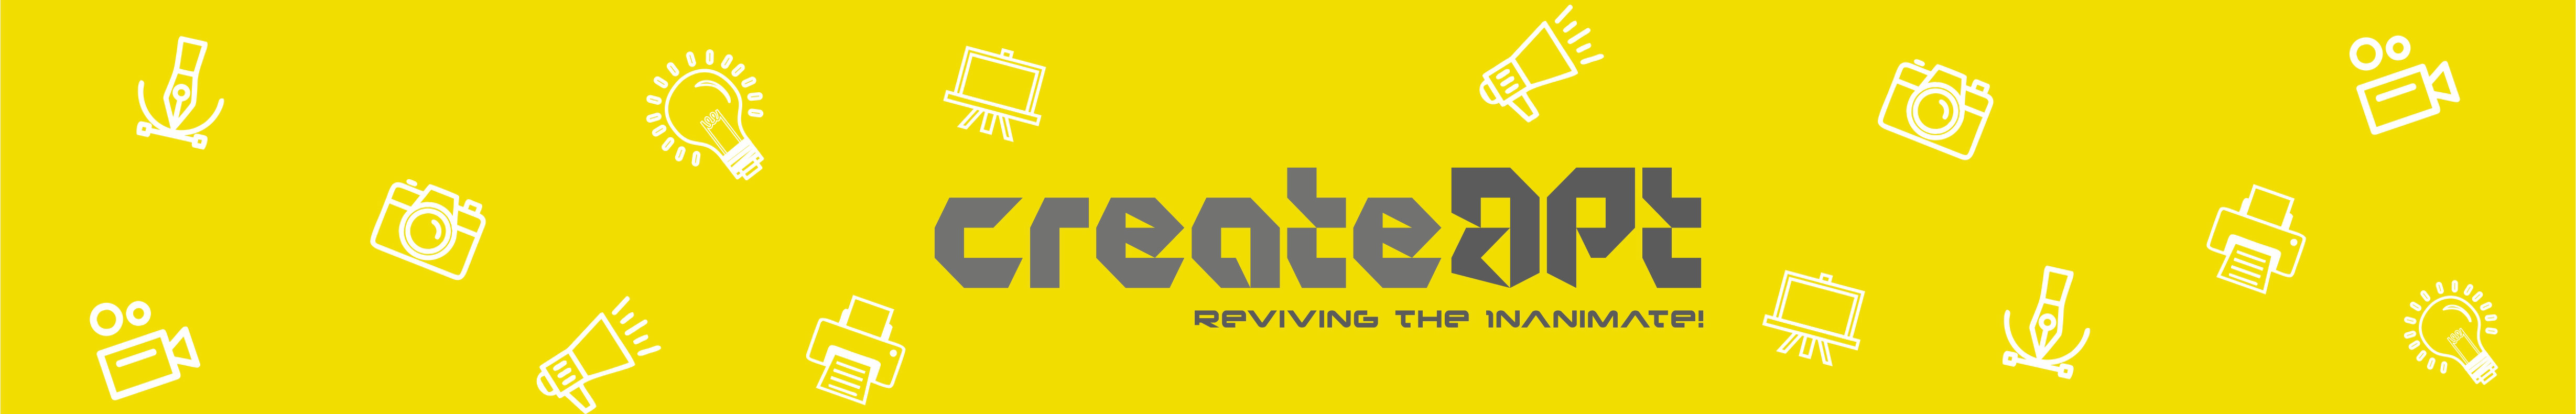 createapt by Anand Parikh's profile banner